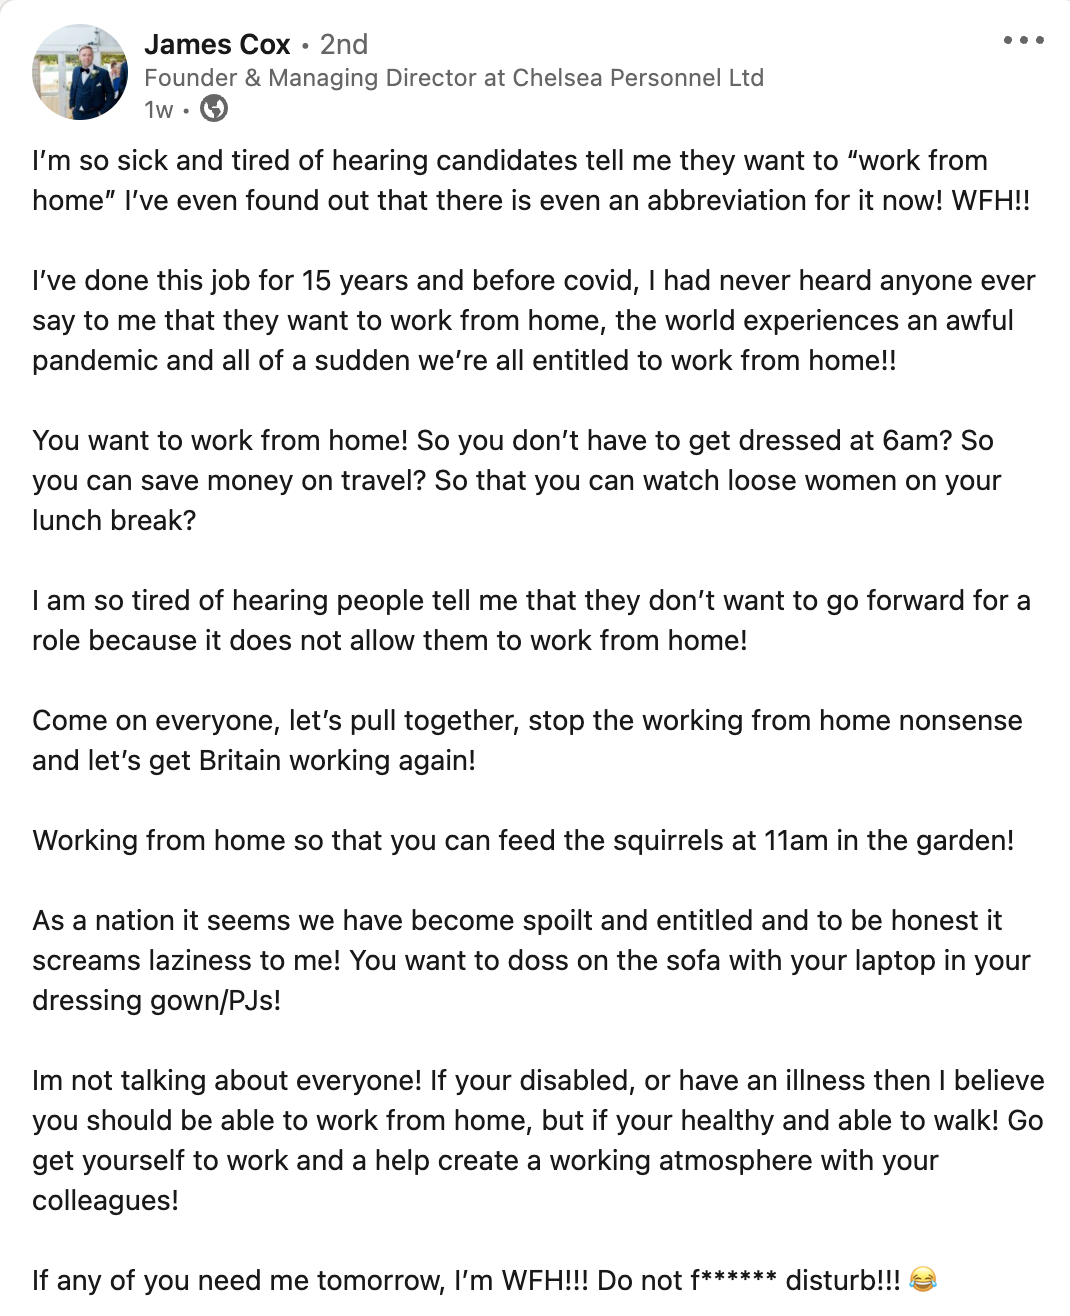 Screenshot of a LinkedIn post by James Cox, ranting about working from home.